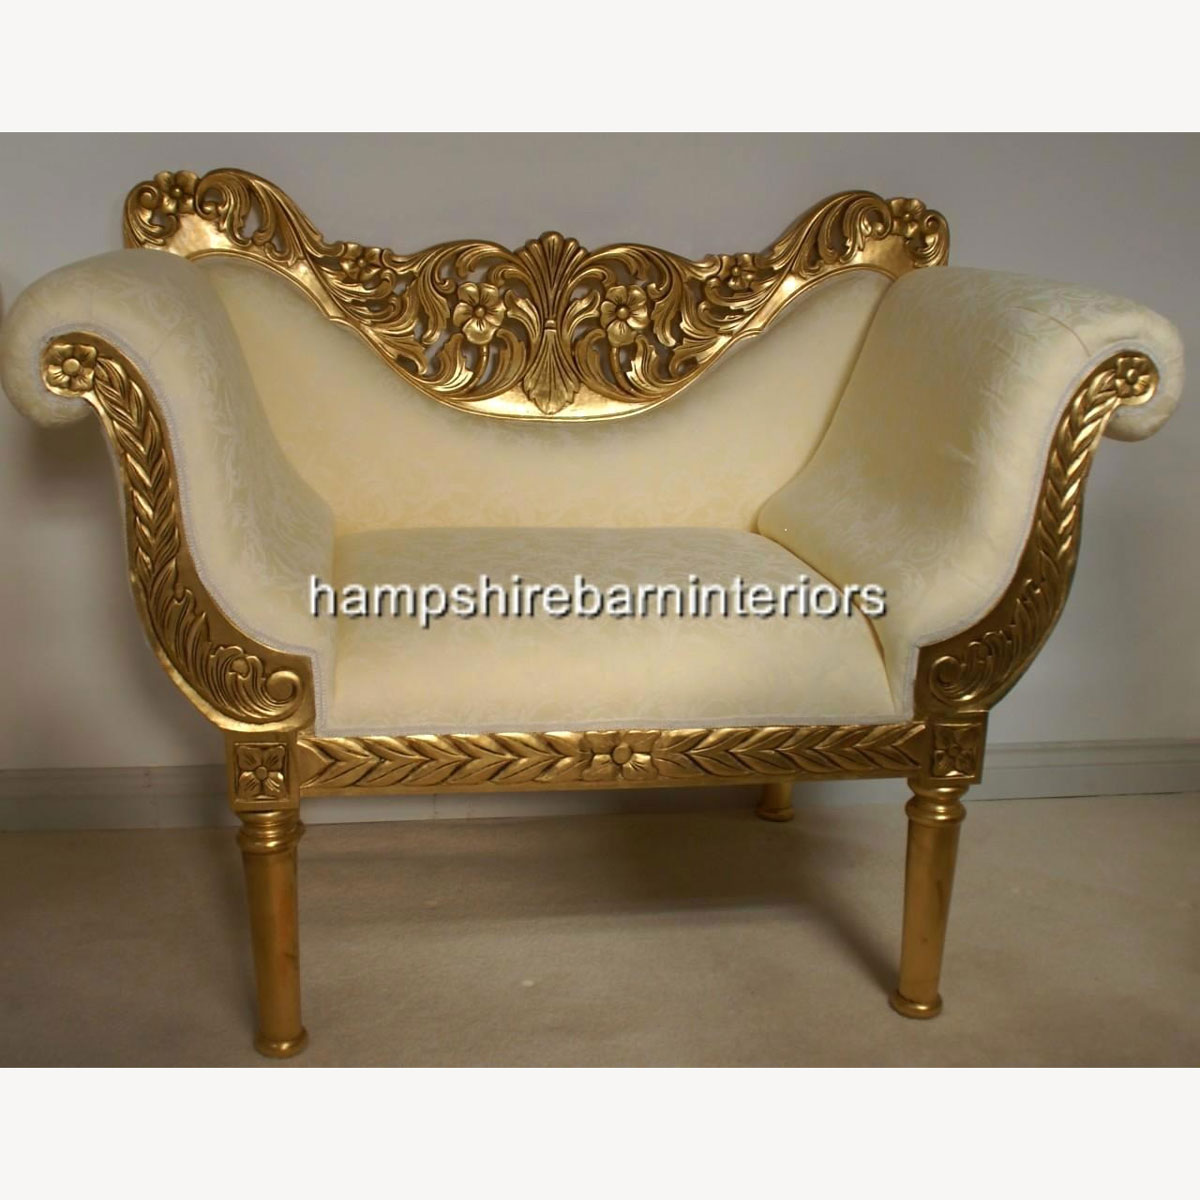 A Prianka 3 Piece Wedding Set Sofa Plus Two Chairs In Gold Leaf And Cream Optional Separate Stools Available 2 - Hampshire Barn Interiors - A Prianka 3 Piece Wedding Set (Sofa Plus Two Chairs) In Gold Leaf And Cream (Optional Separate Stools Available) -